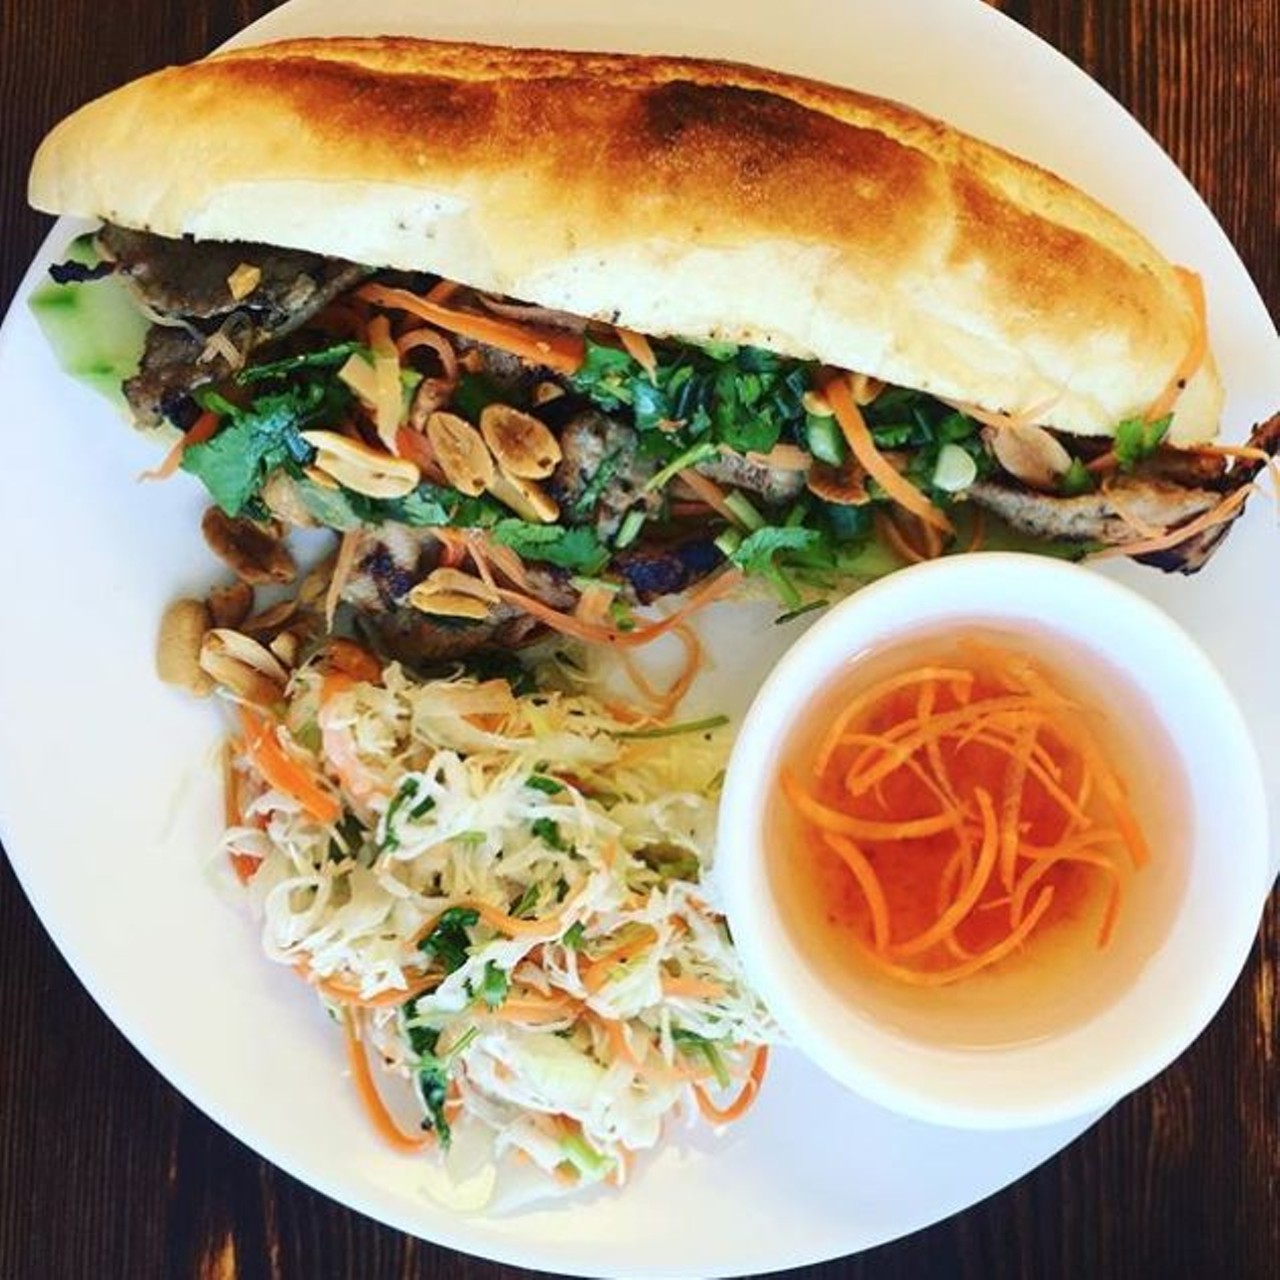 Berni Vietnamese
8742 Wurzbach Road, (210) 485-5982
Service is speedy, and servings are massive at this spotless Vietnamese joint off Wurzbach that ends your meal with a warm bowl of tapioca. 
Photo via Instagram,  sophie_satx